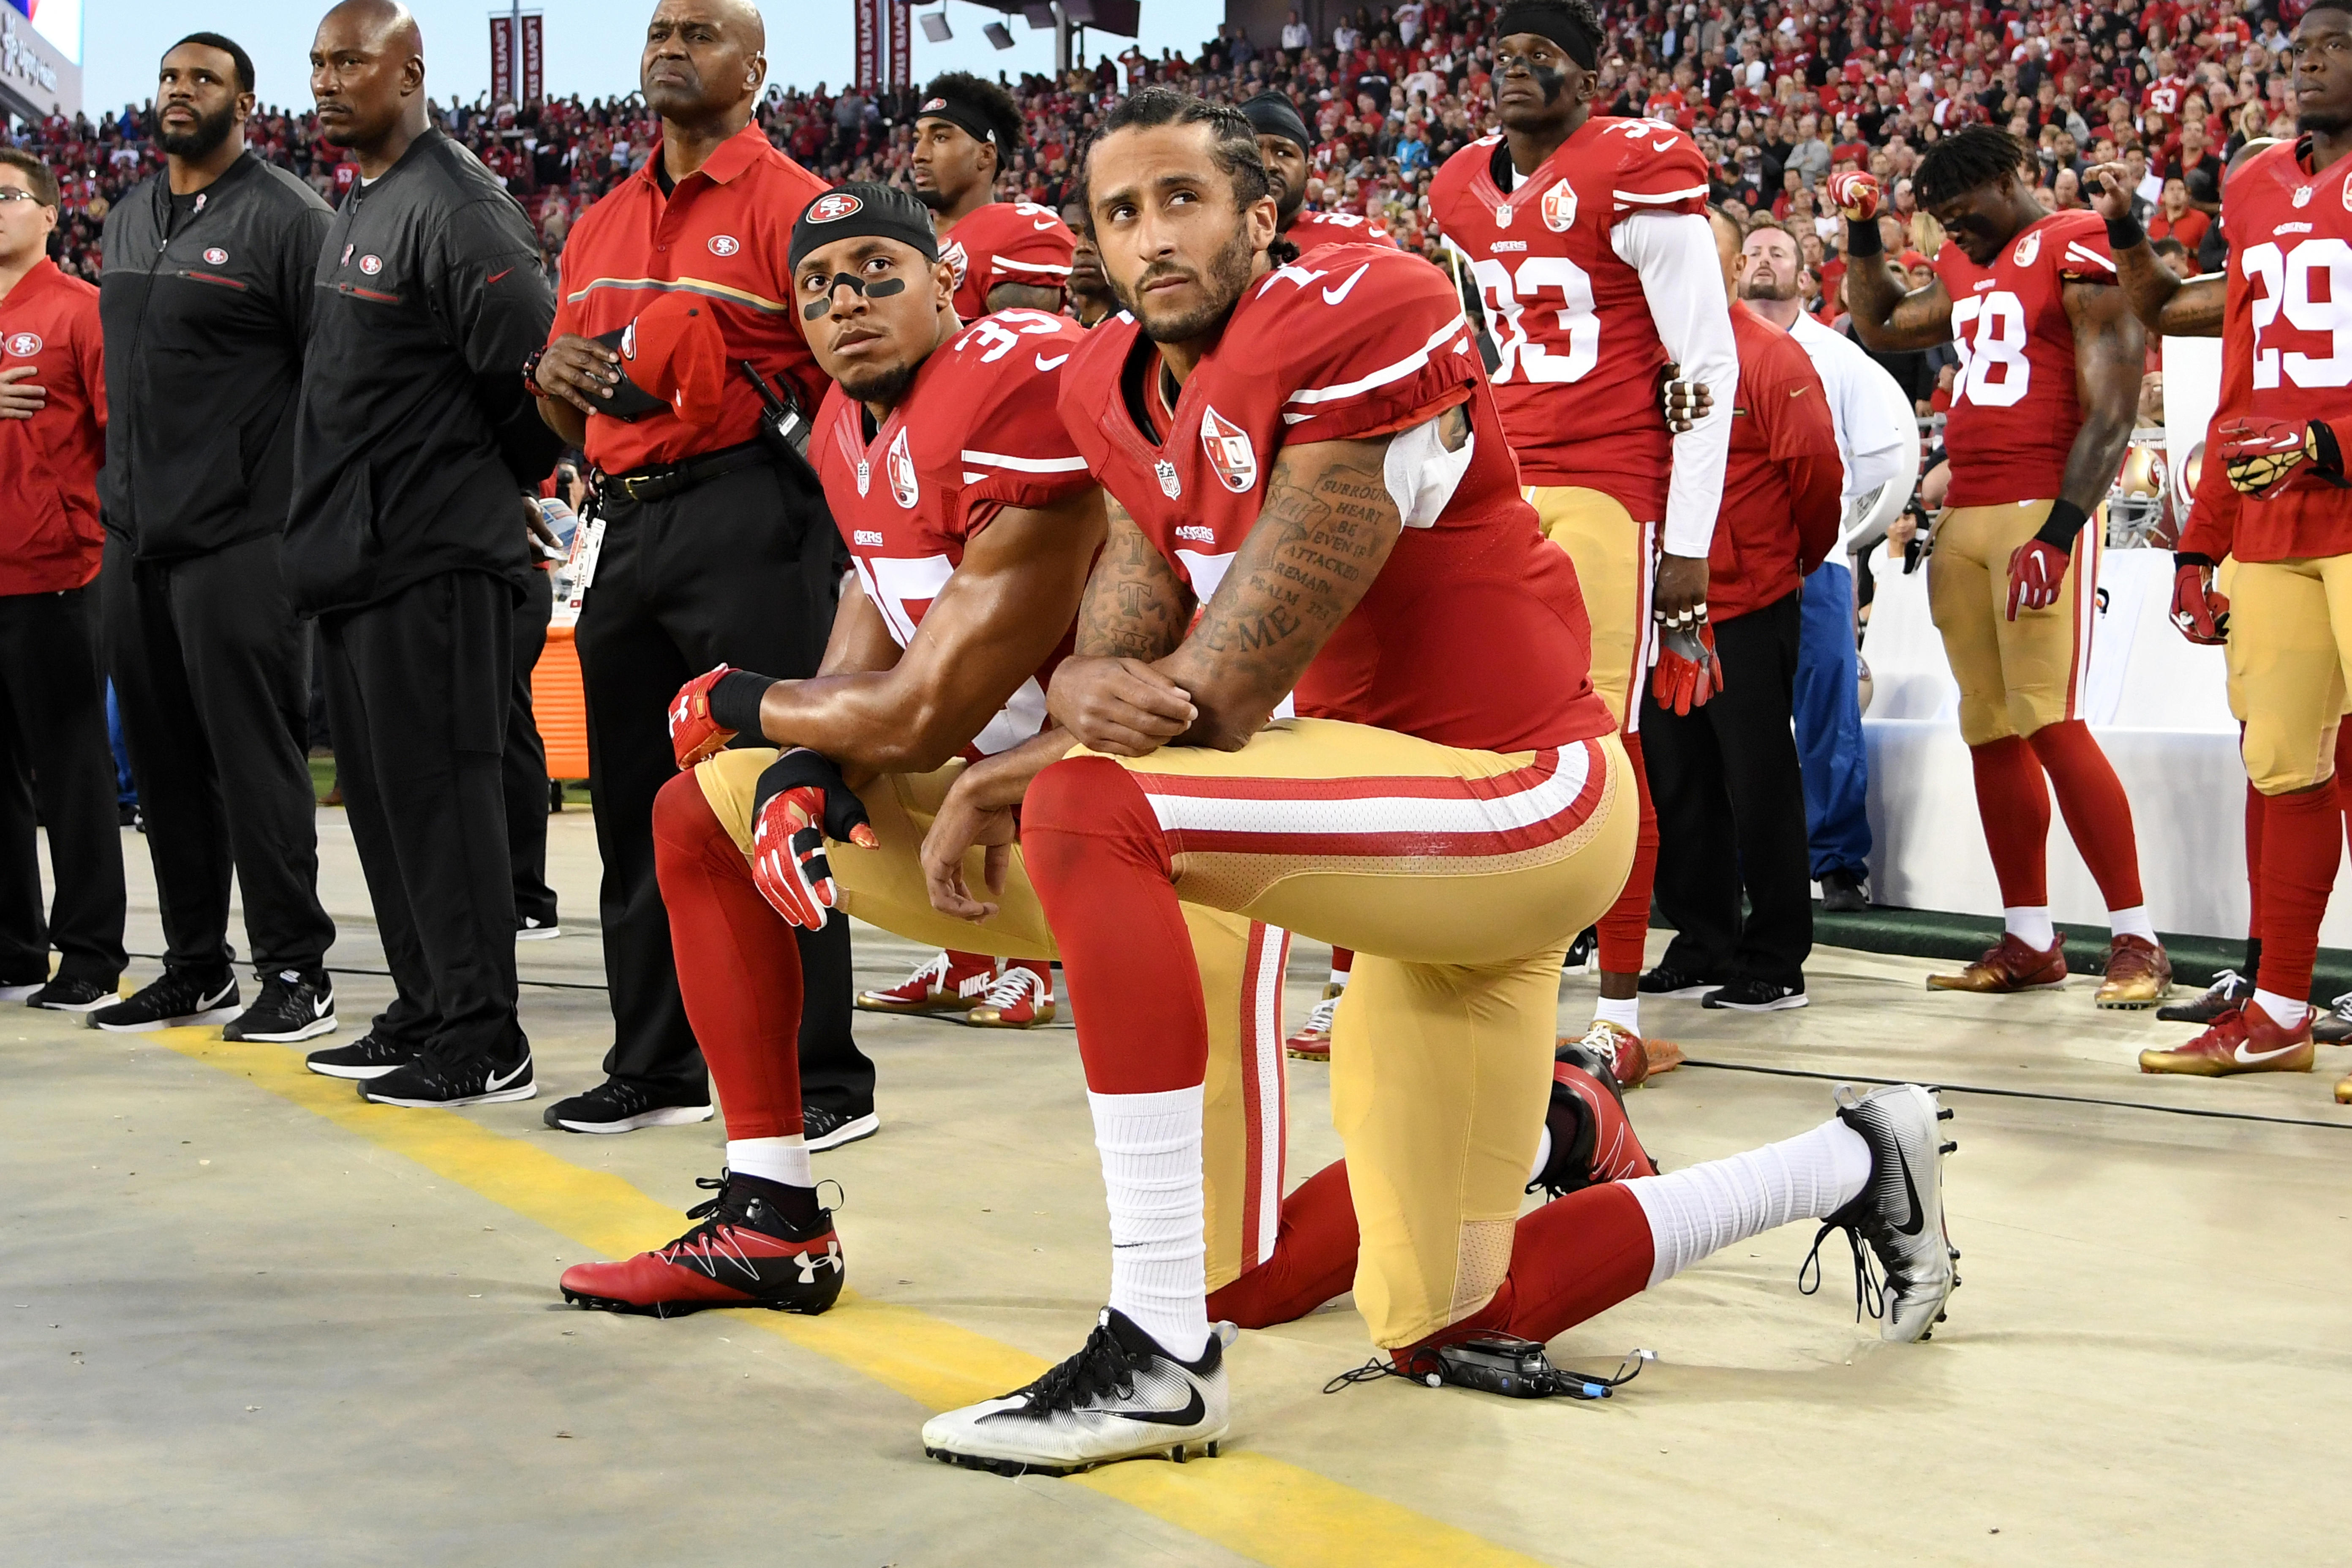 NFL protest player Colin Kaepernick chosen by Nike as face of new campaign